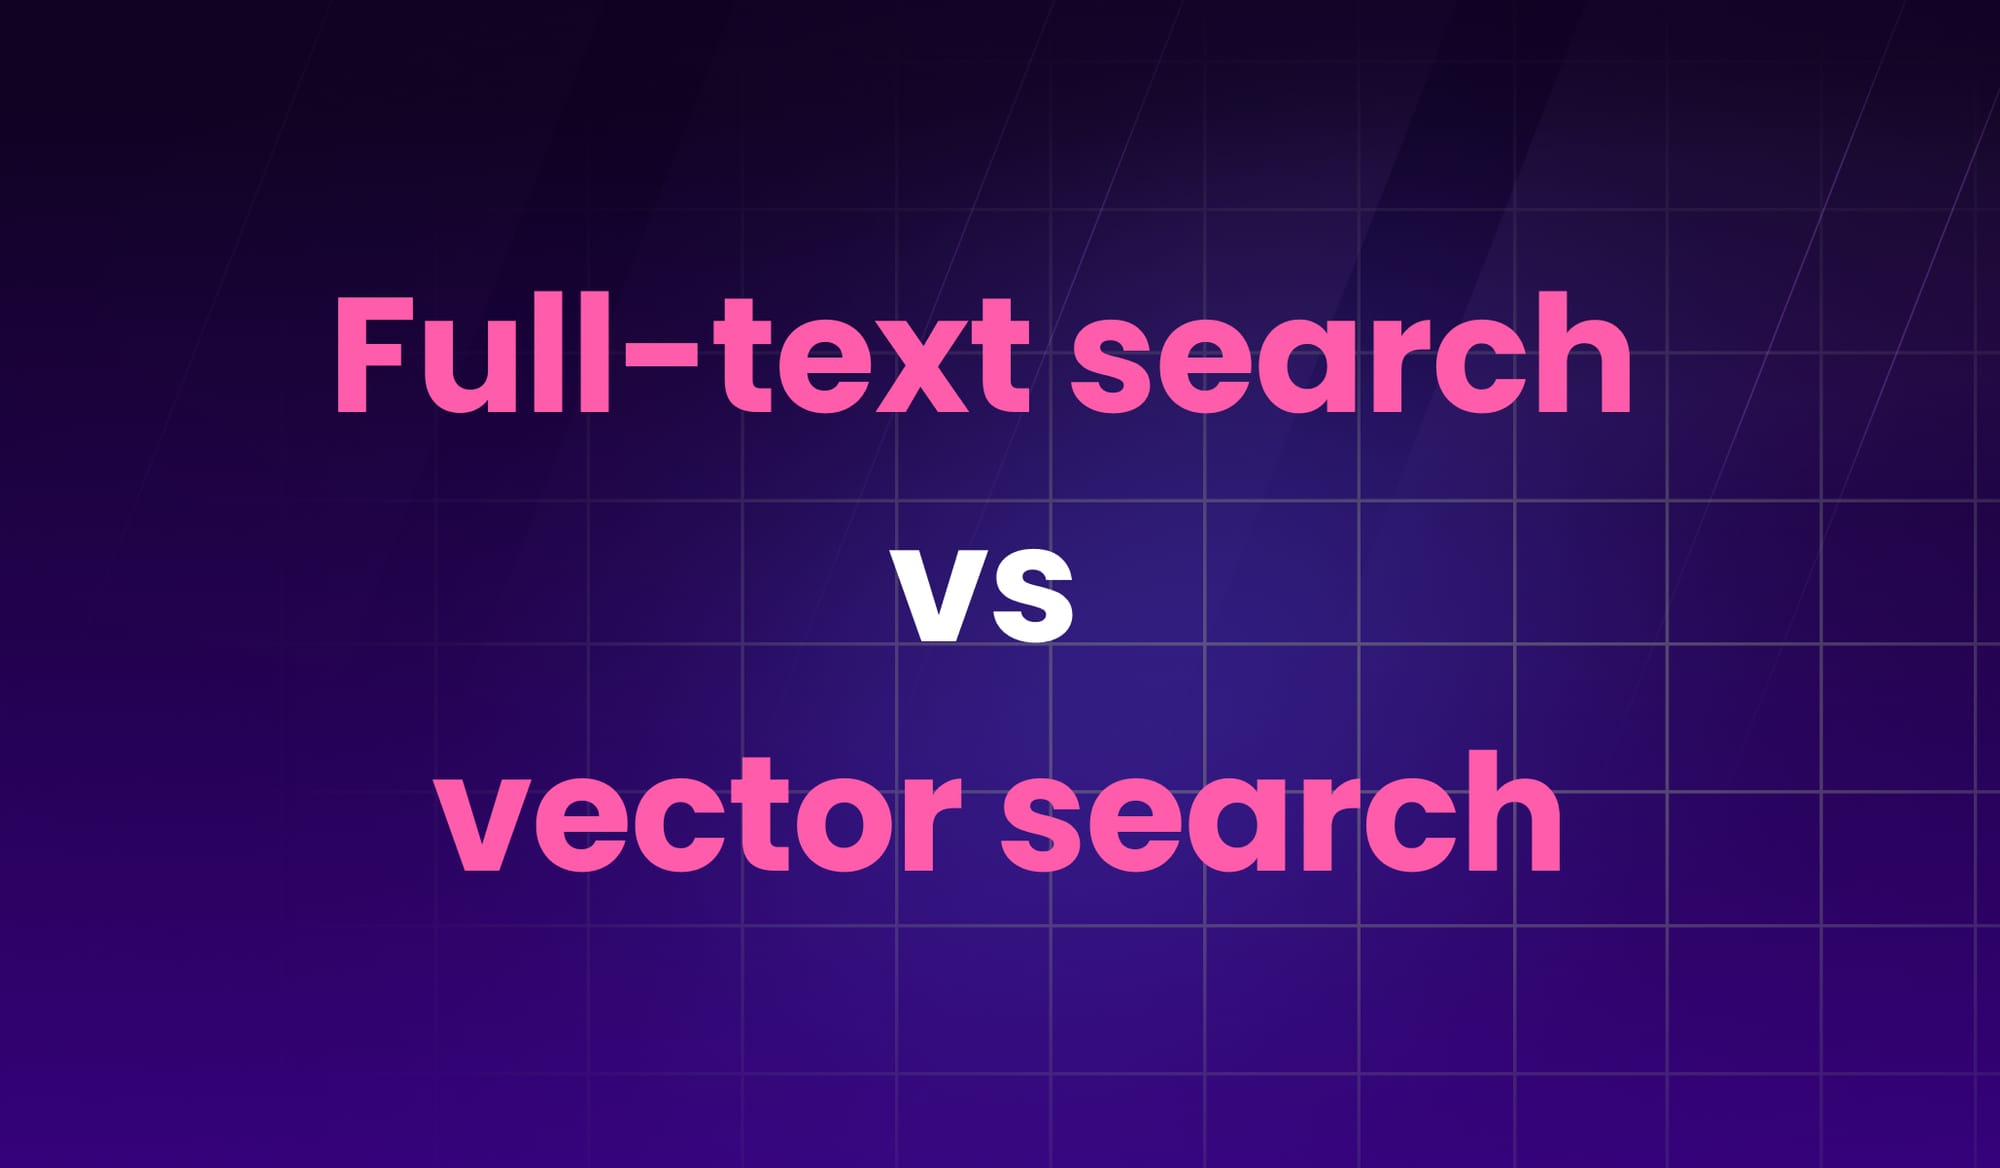 Full-text search vs vector search